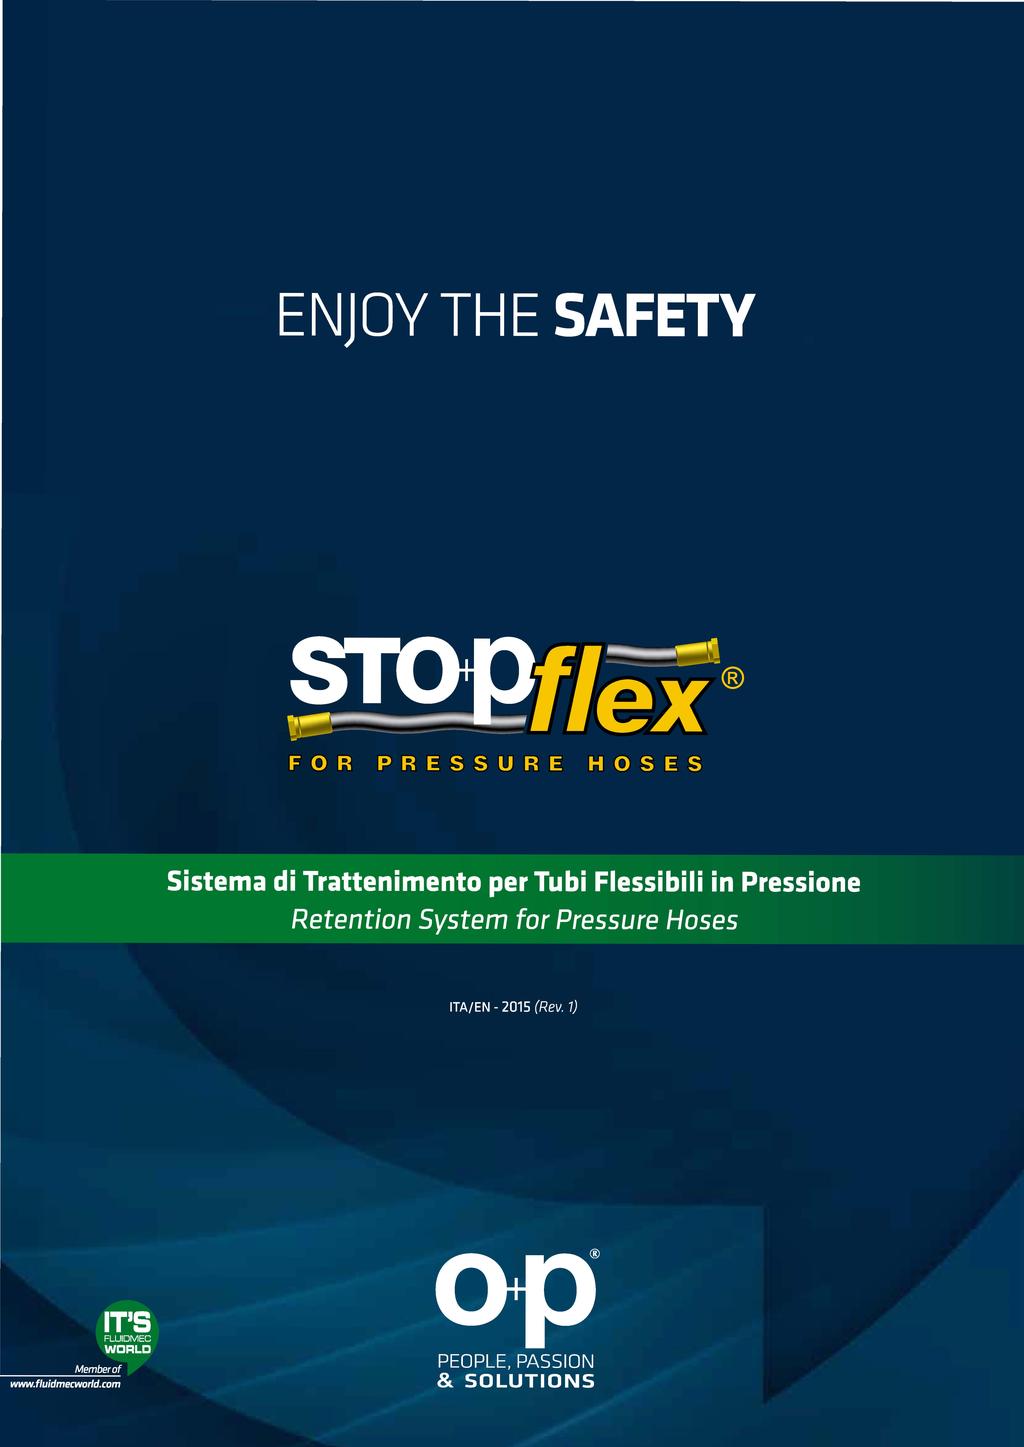 TESTED PROTECTION INTERNATIONAL PATENT The Stapf/ex system, upon correct mounting, was manufactured and tested to ensure the retention of the hose up to the maximum pressure